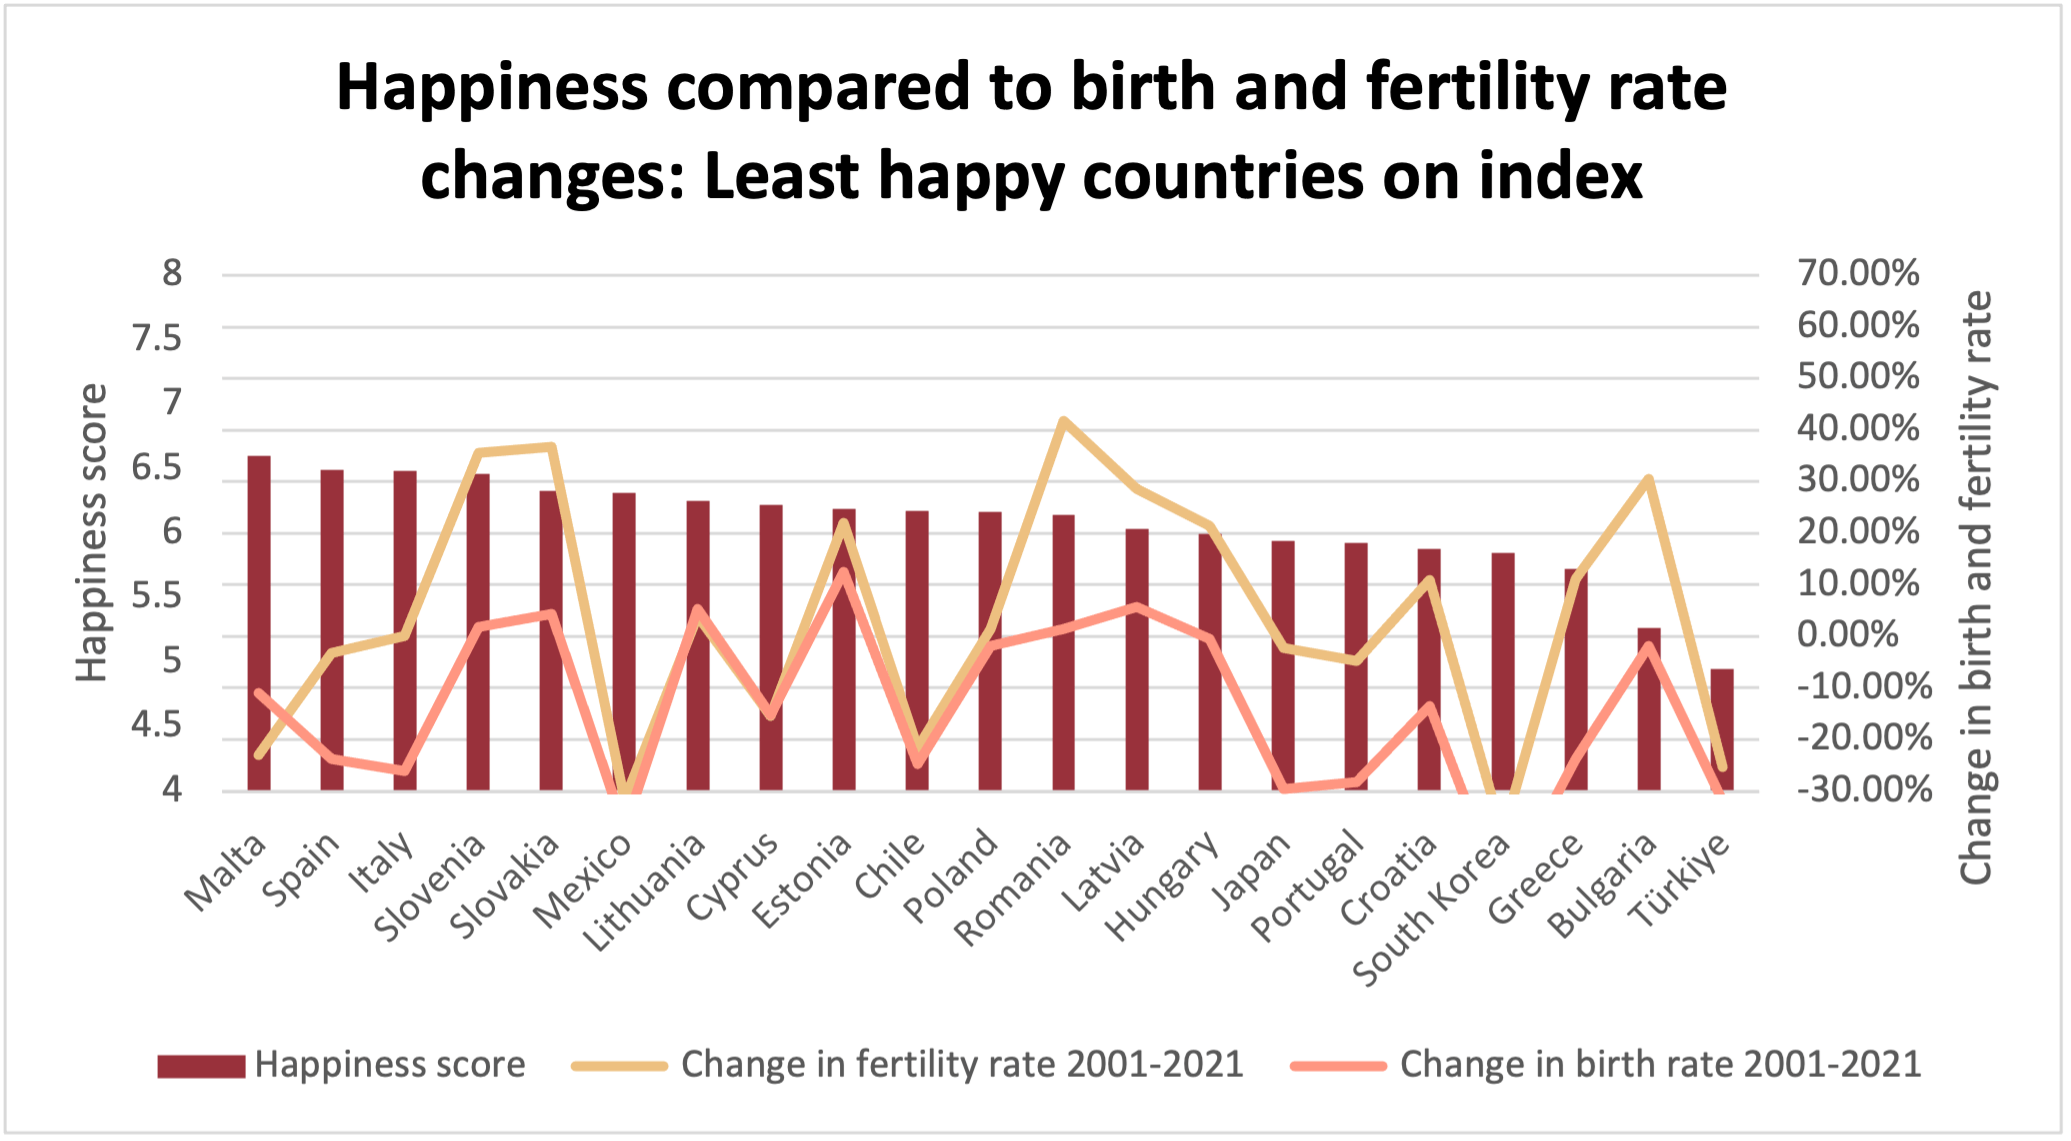 Bar chart showing the happiness score of differnet countries compared to changes in fertility and birth rate